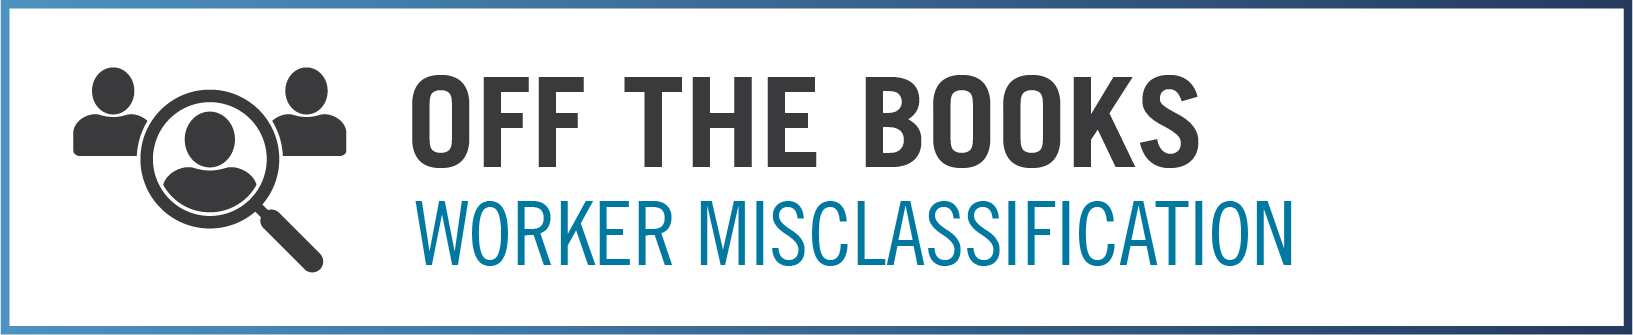 Off the Books Worker Misclassification